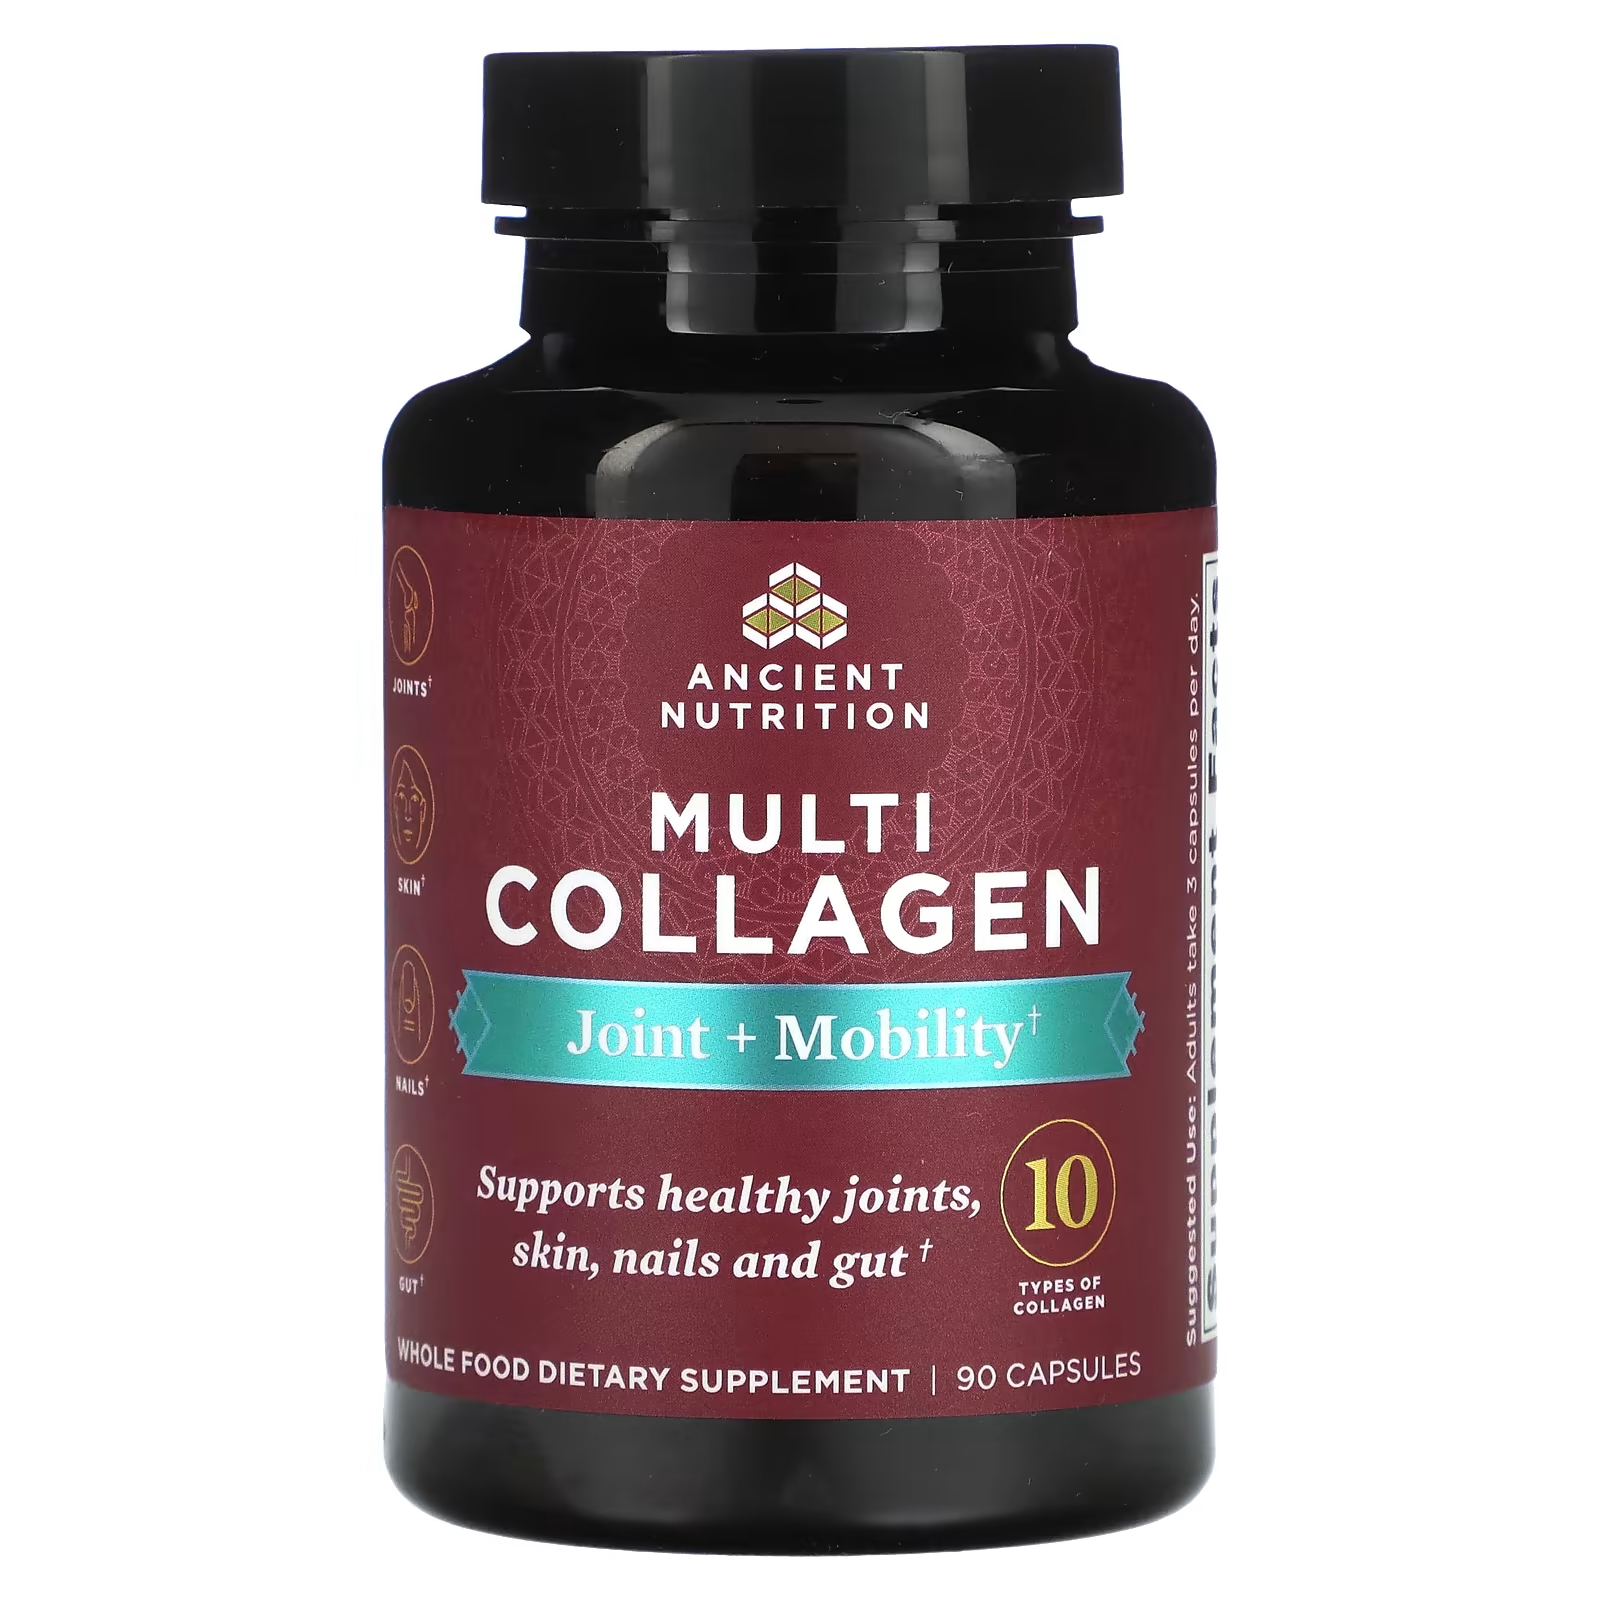 Ancient Nutrition Multi Collagen Joint + Mobility 90 капсул dr axe ancient nutrition multi collagen joint mobility 45 капсул